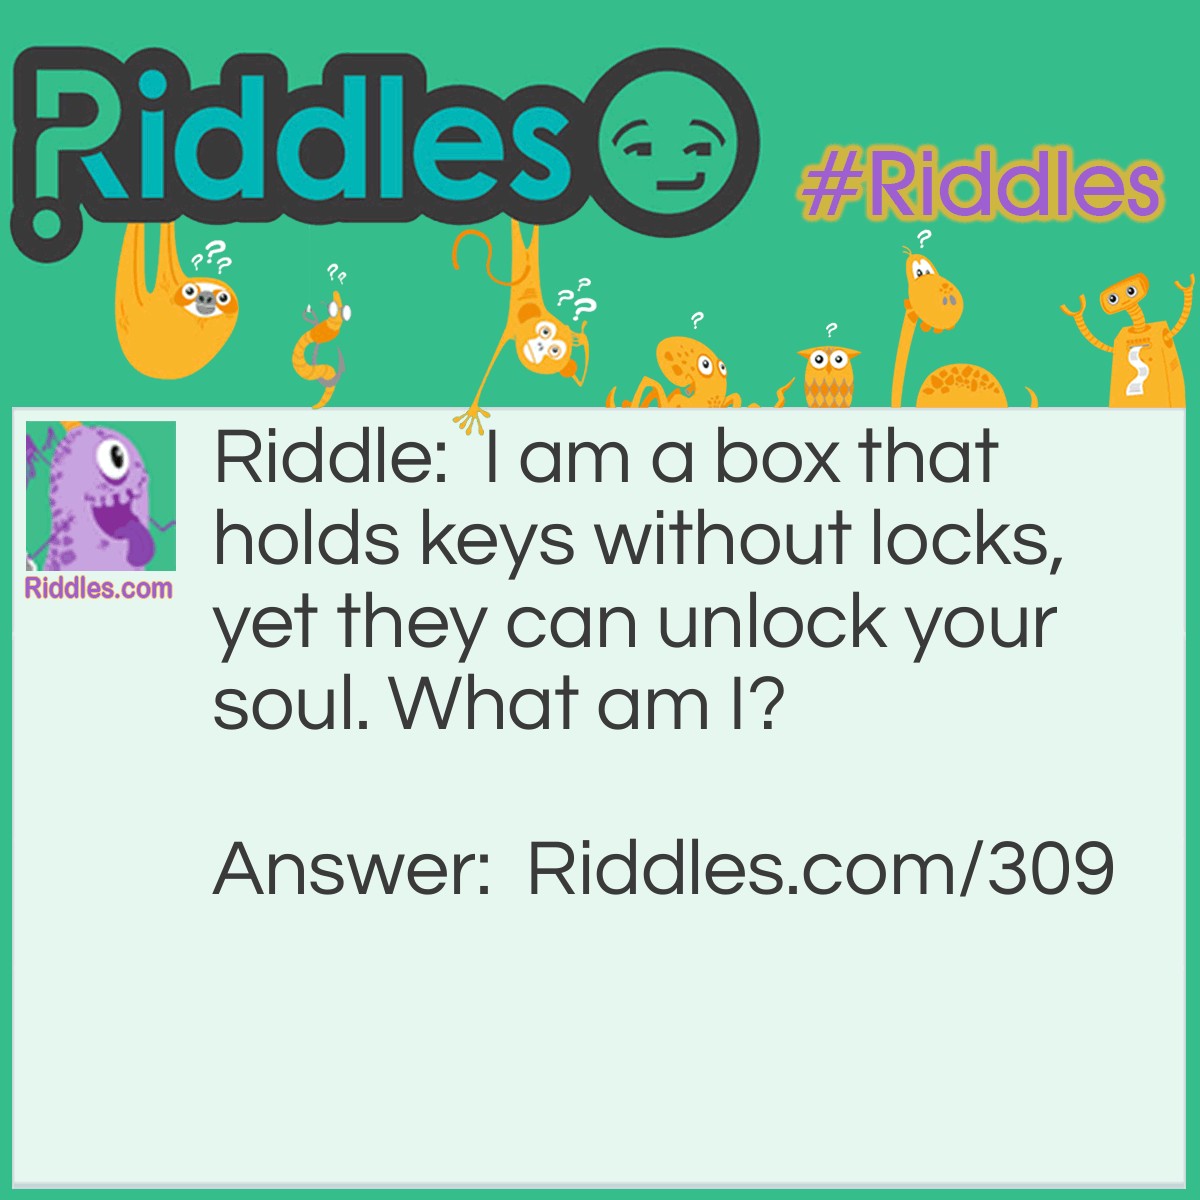 Riddle: I am a box that holds keys without locks, yet they can unlock your soul. What am I? Answer: A Piano.